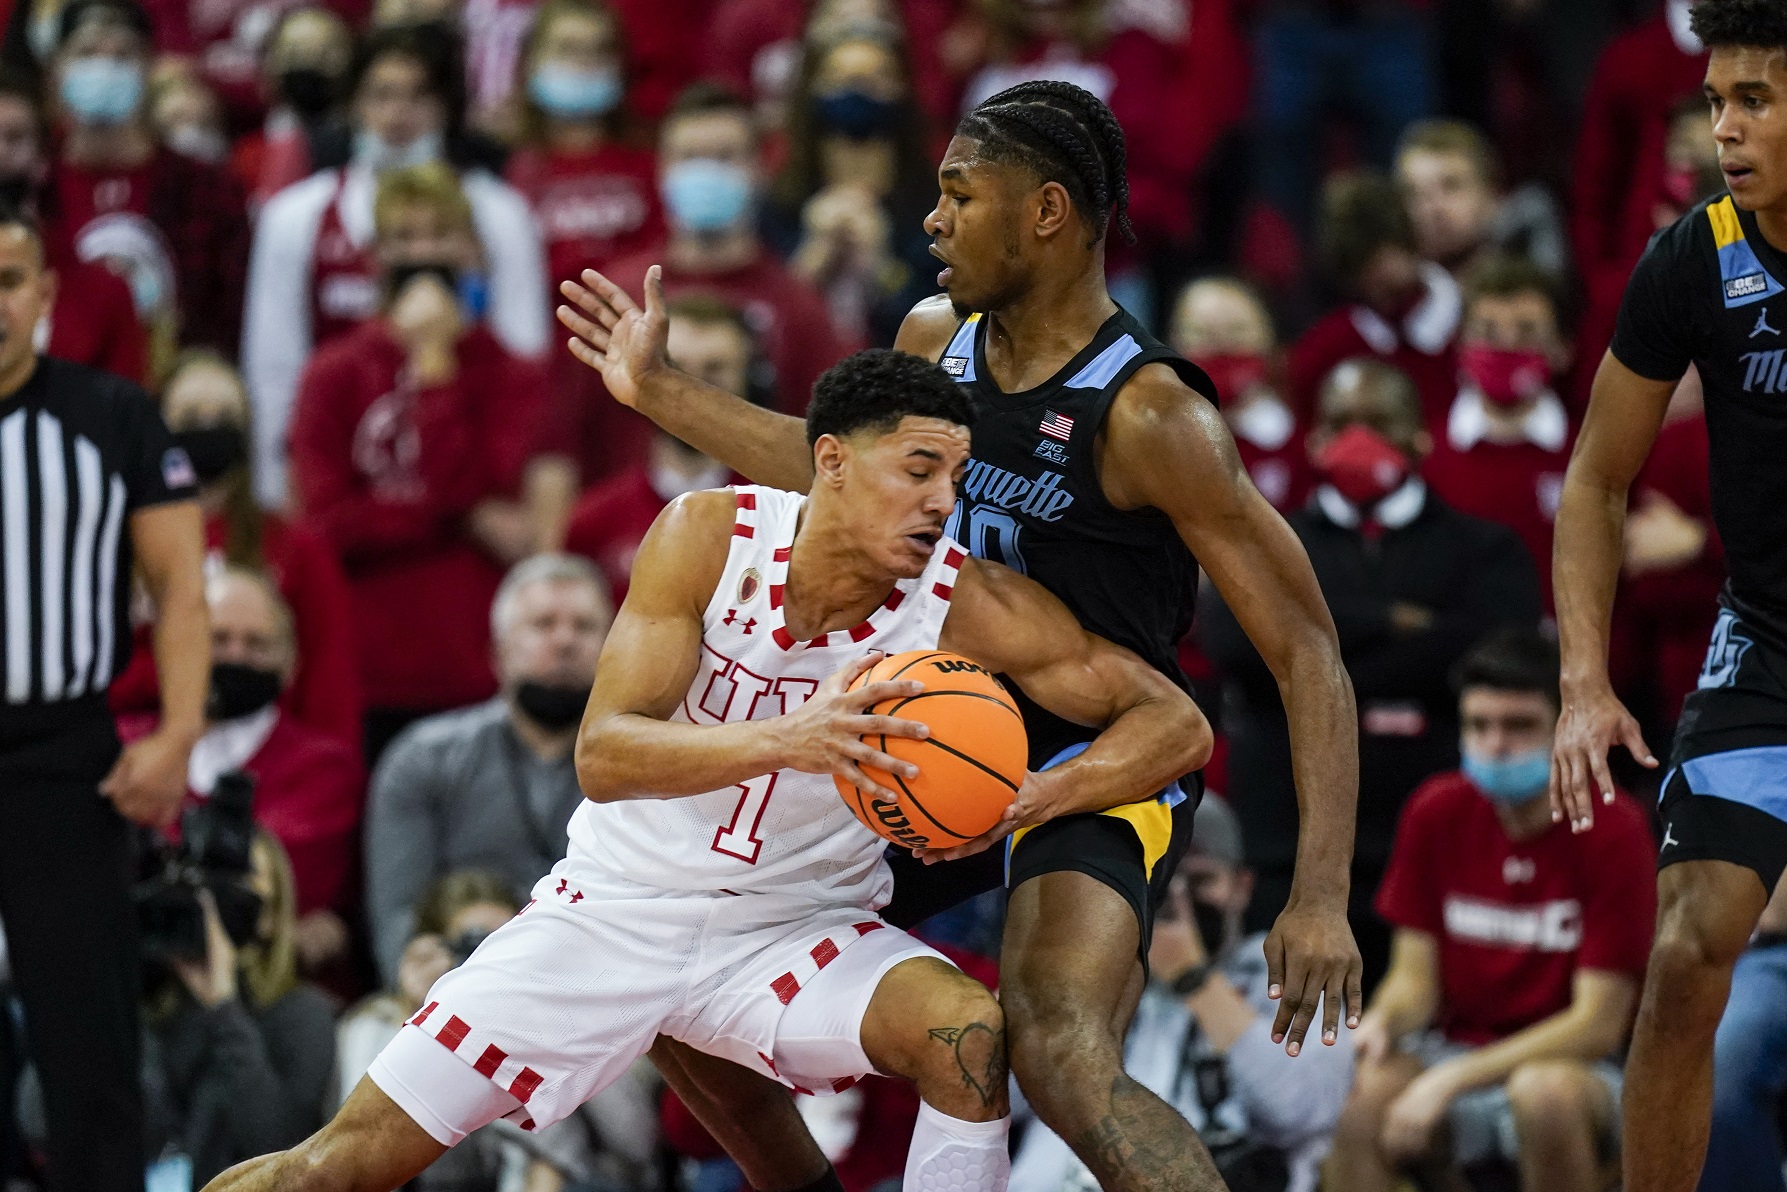 Badgers find opponent to play Thursday, after cancellation